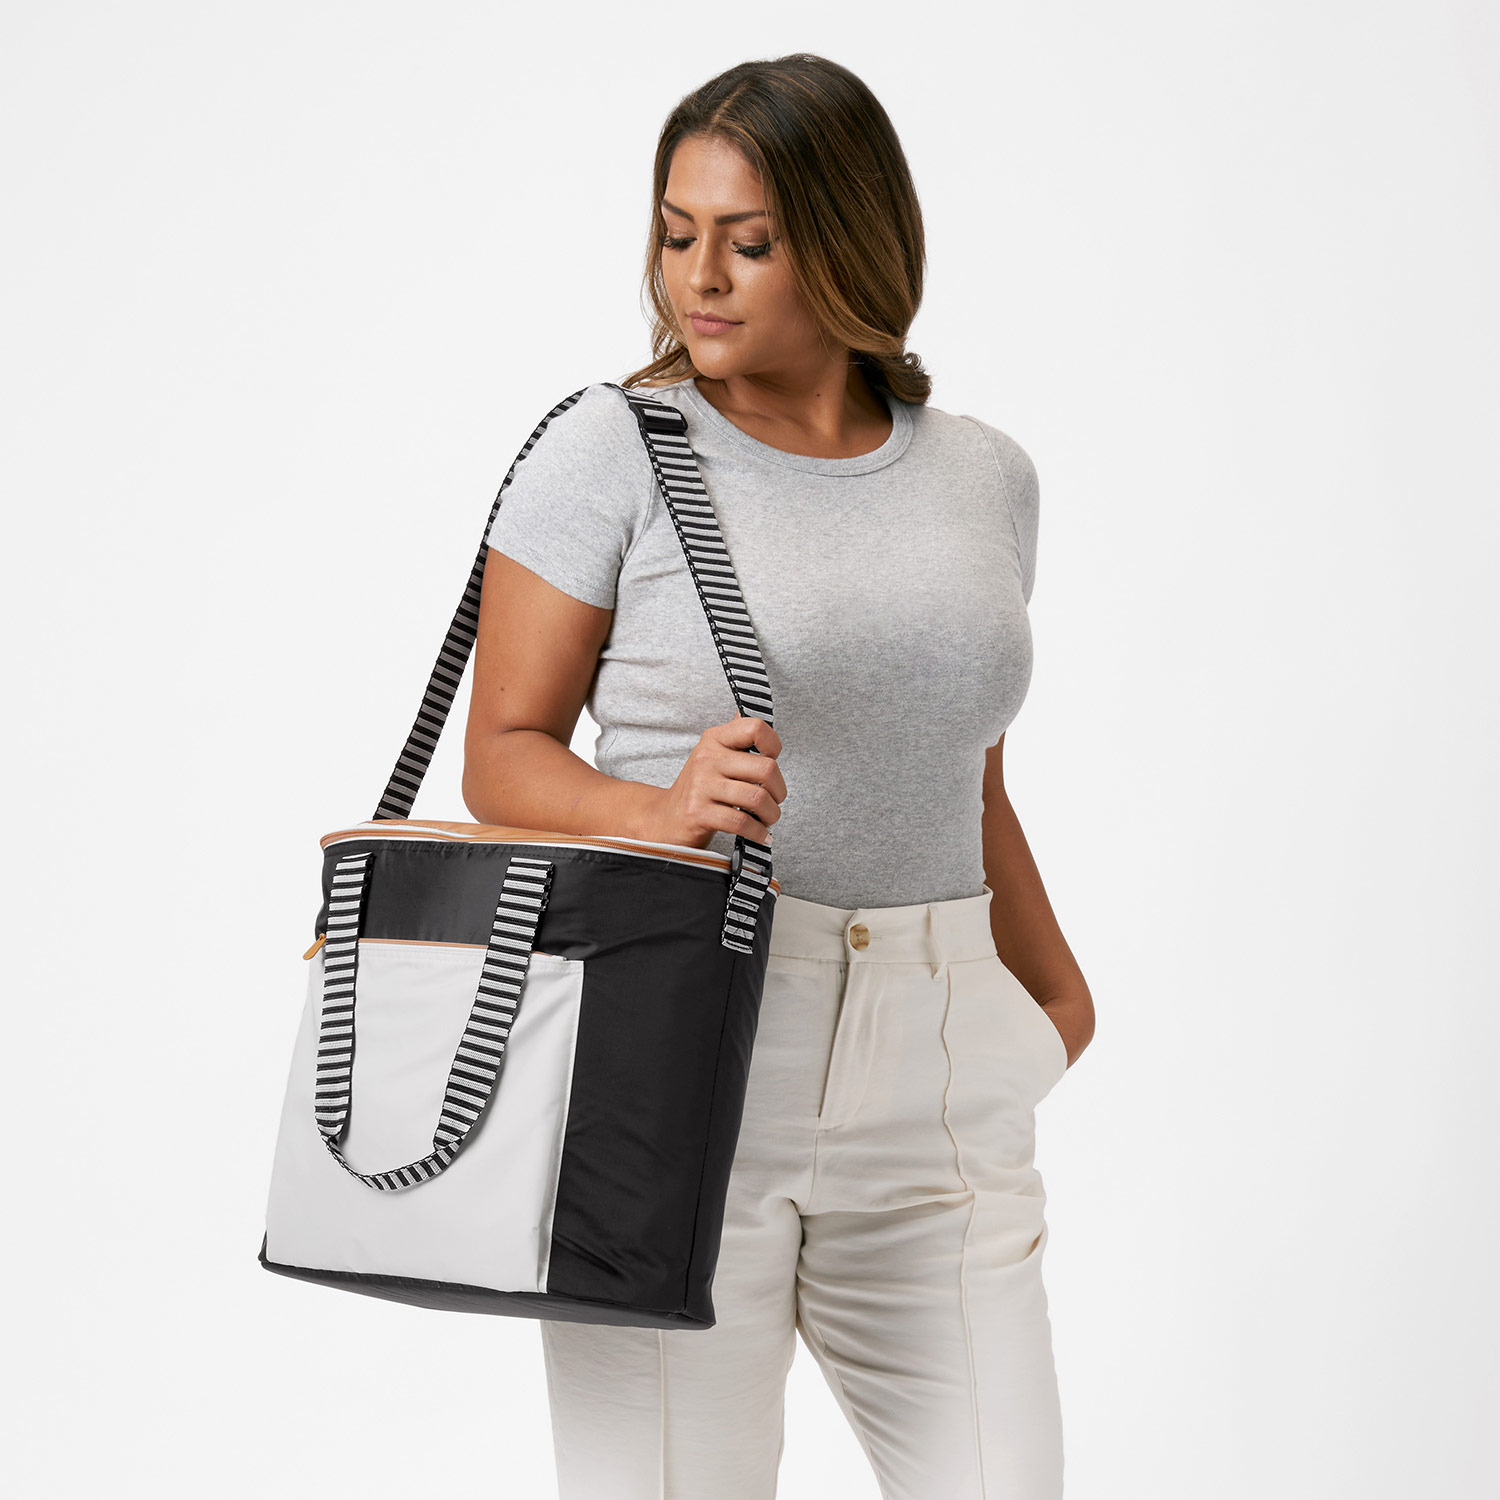 Back to Cool: One Tote, Three Ways